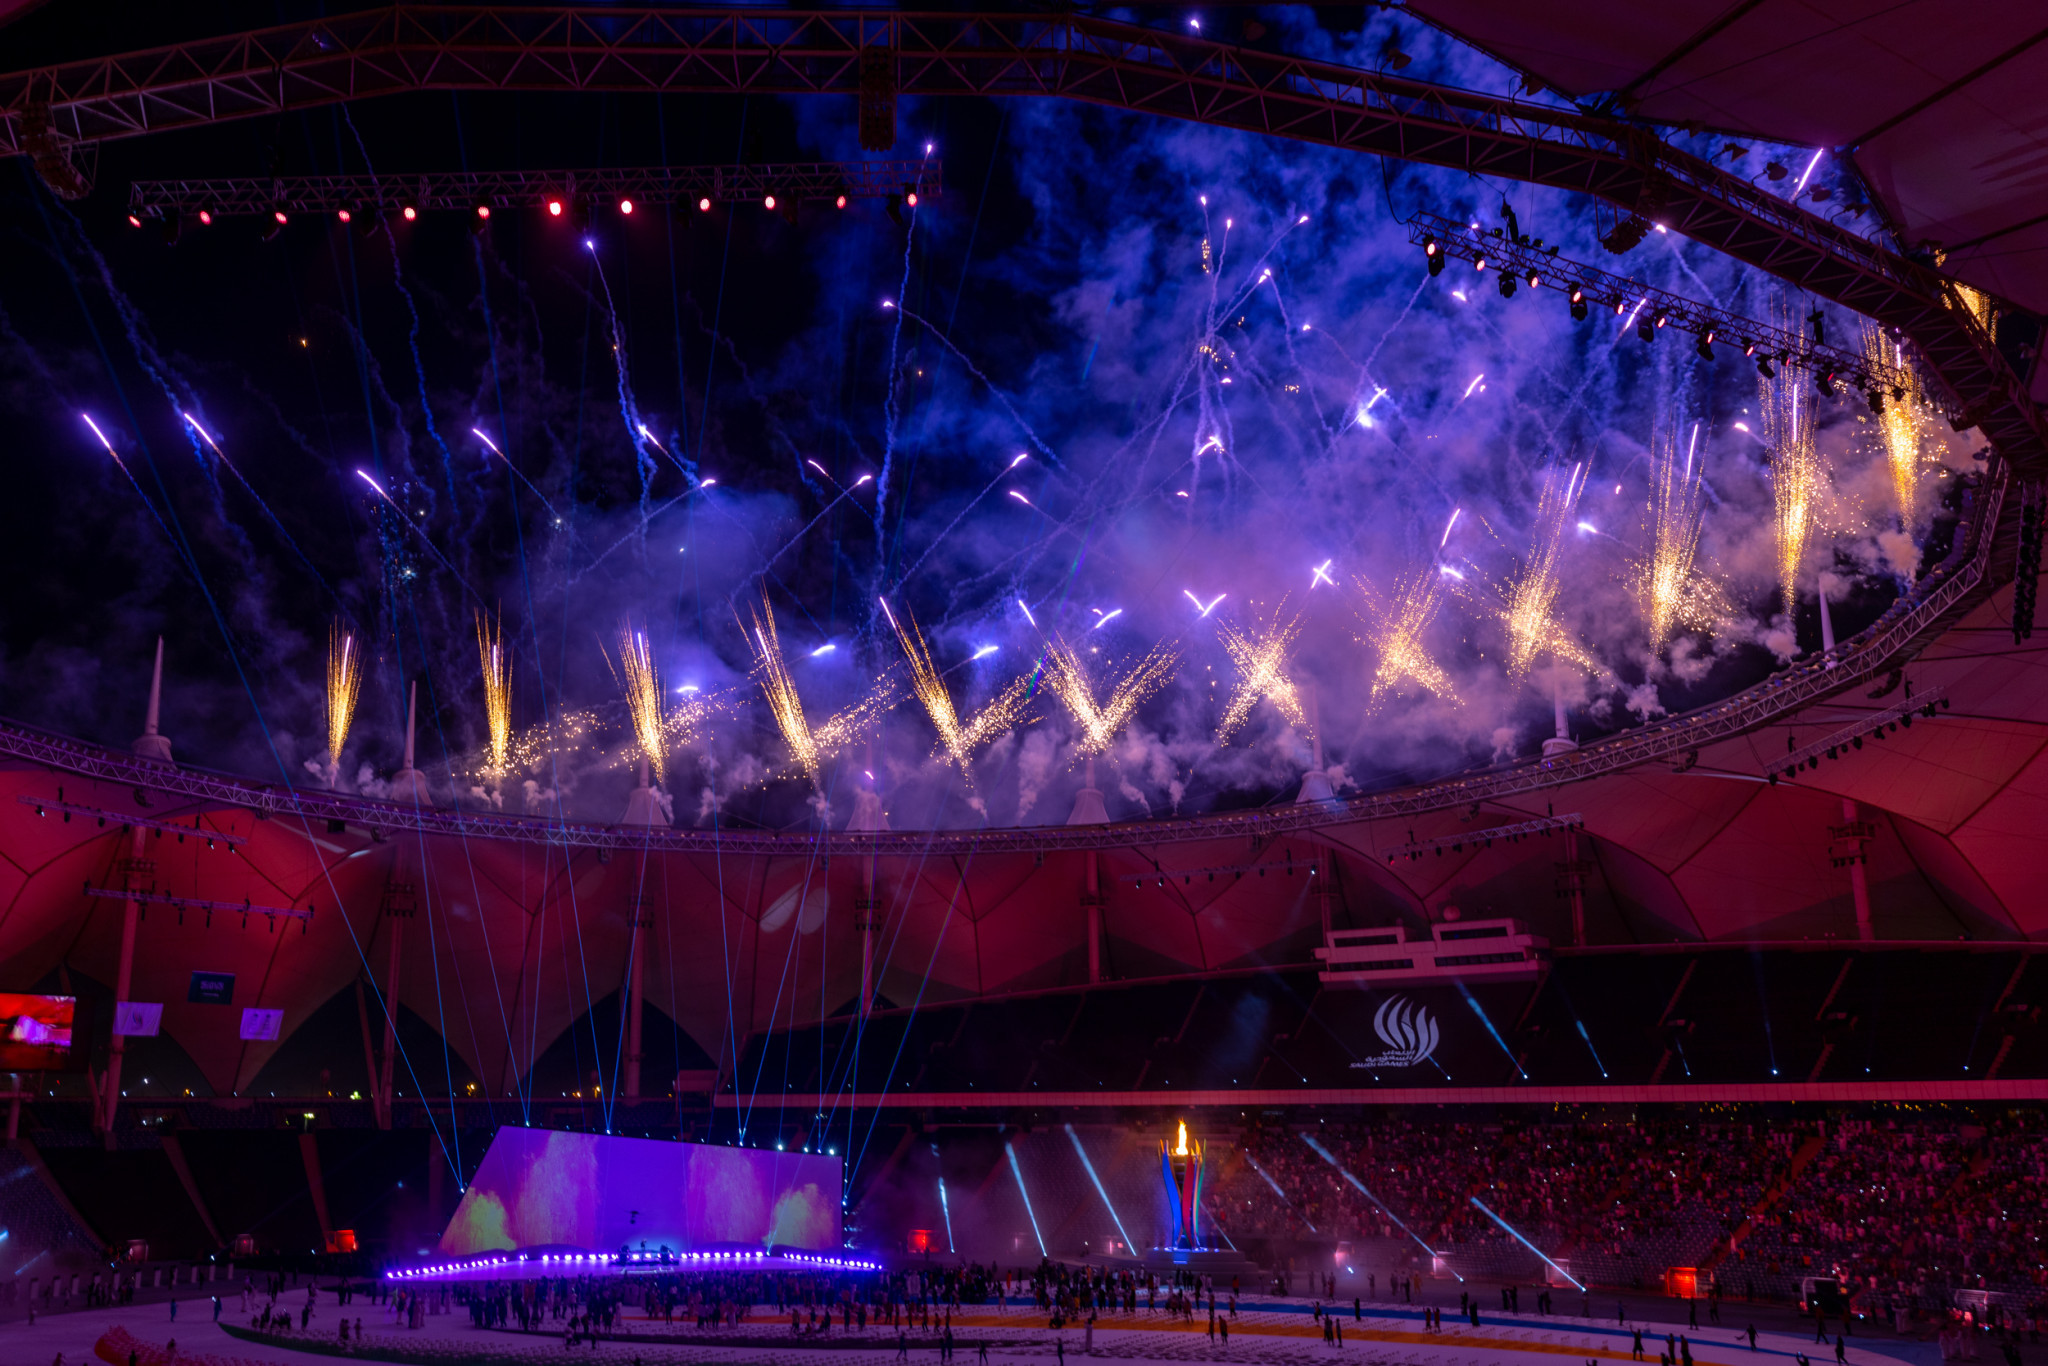 Fireworks were fired as David Guetta closed the Opening Ceremony ©Saudi Games